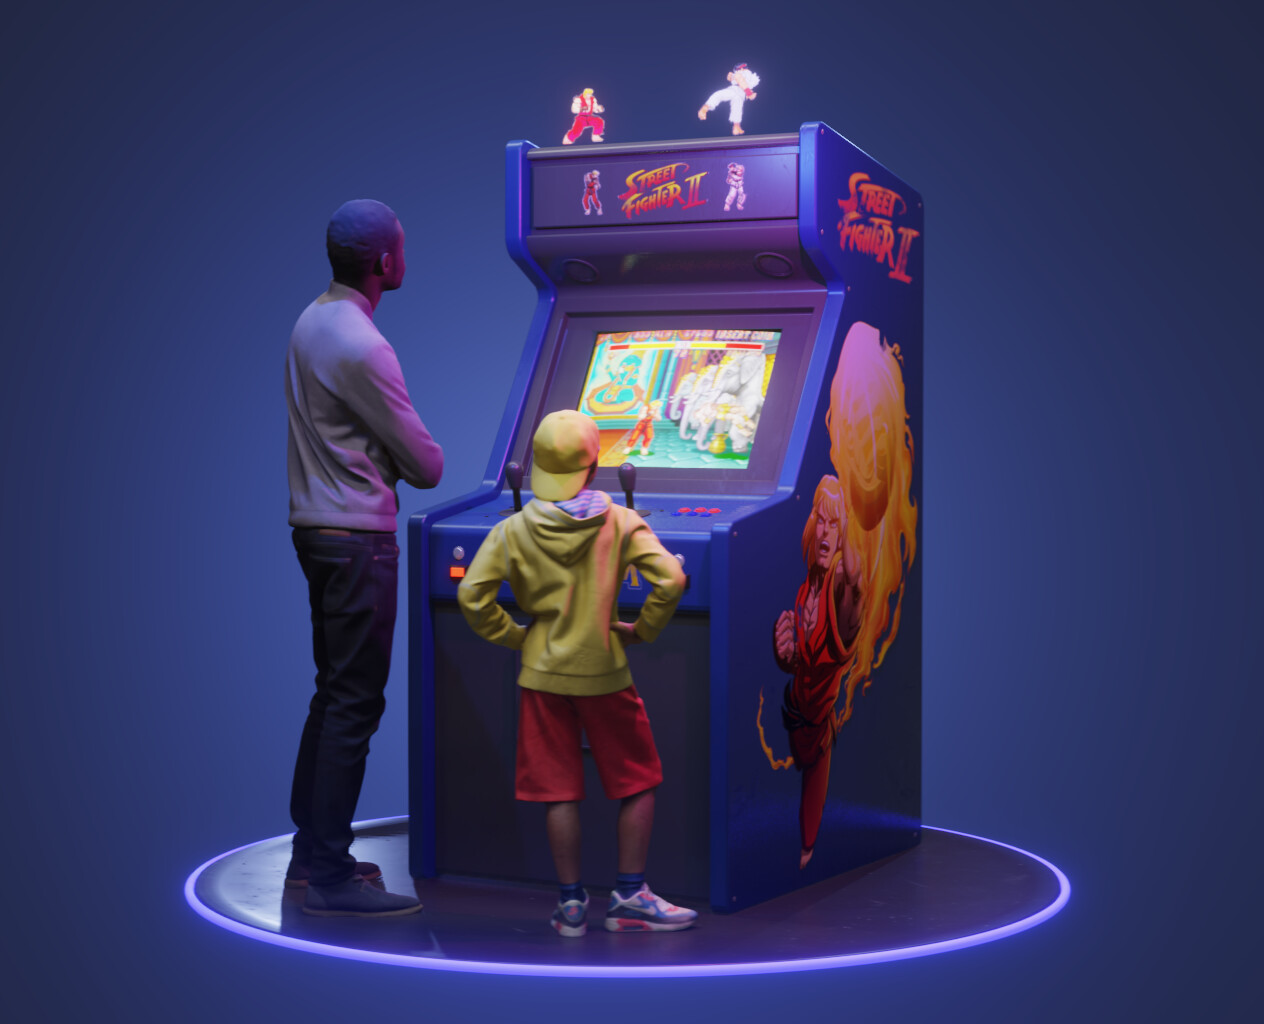 What are some of your fondest arcade memories? I really enjoyed playing Street Fighter, Mortal Kombat, Time Crisis, the claw machine and pinball. 